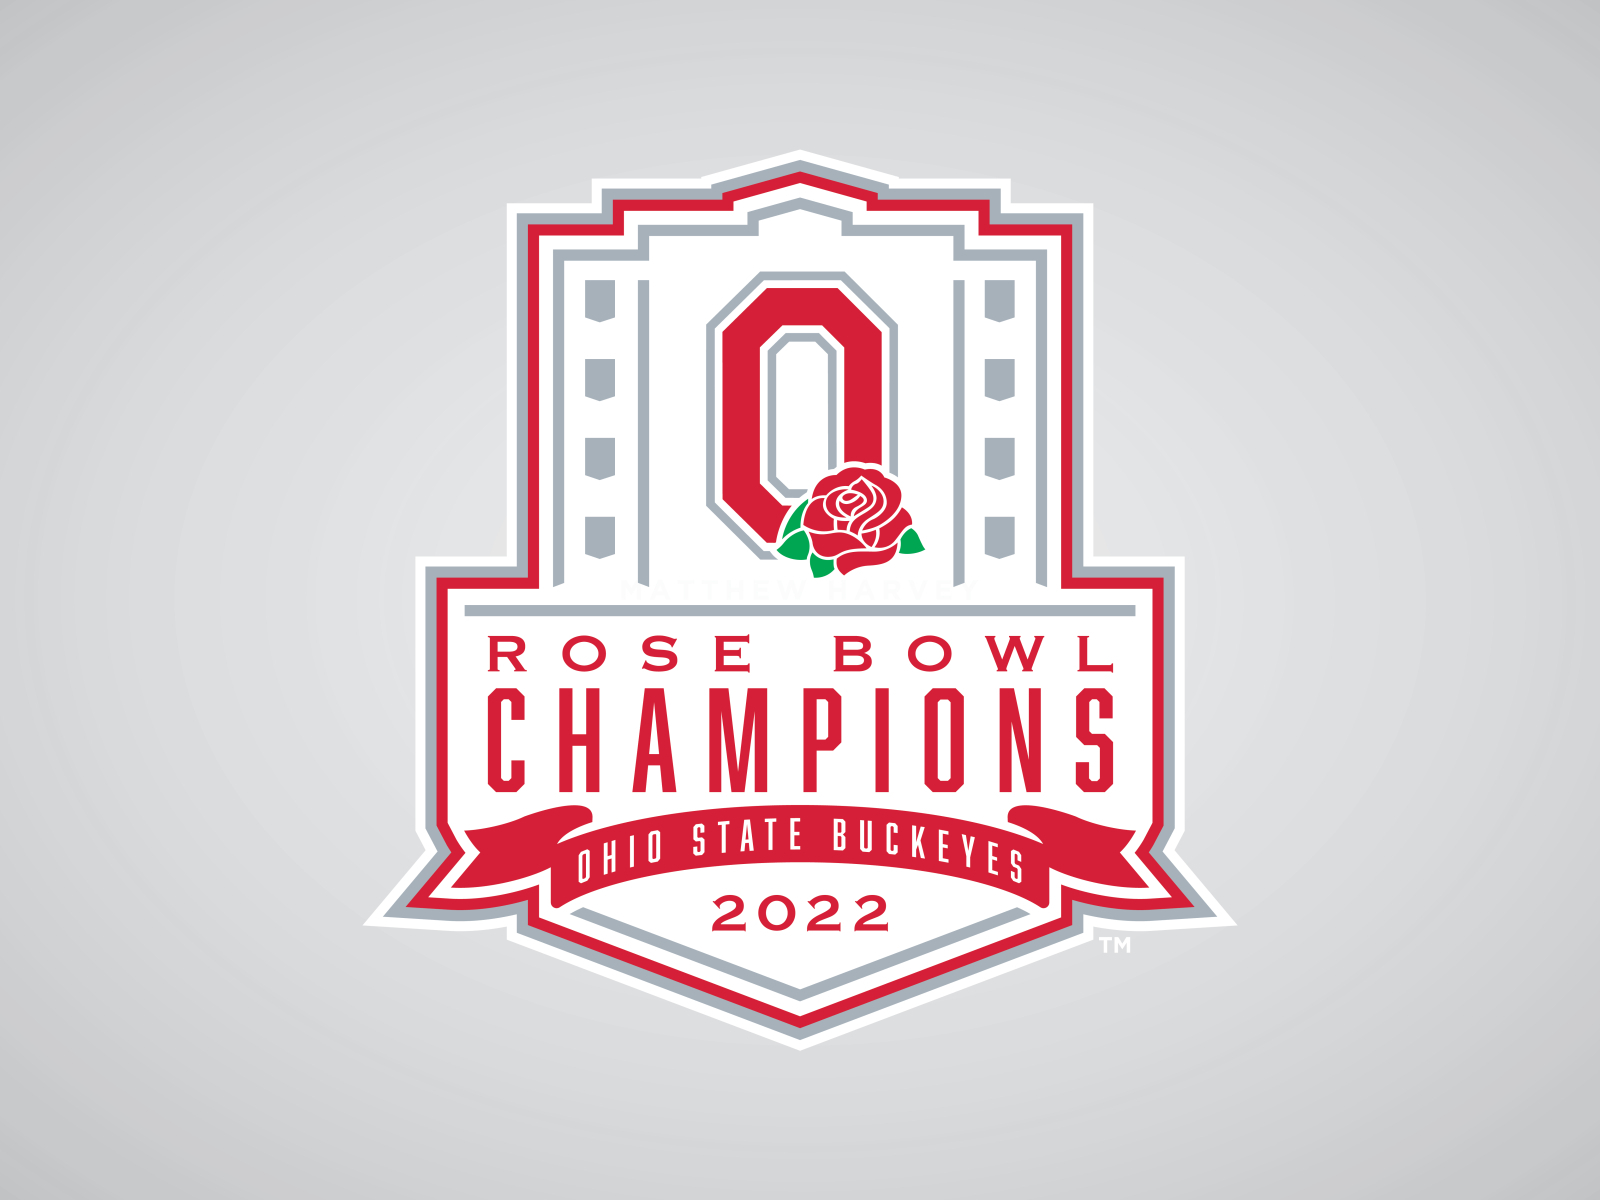 OHIO STATE BUCKEYES 2022 ROSE BOWL CHAMPIONS Logo Concept by Matthew